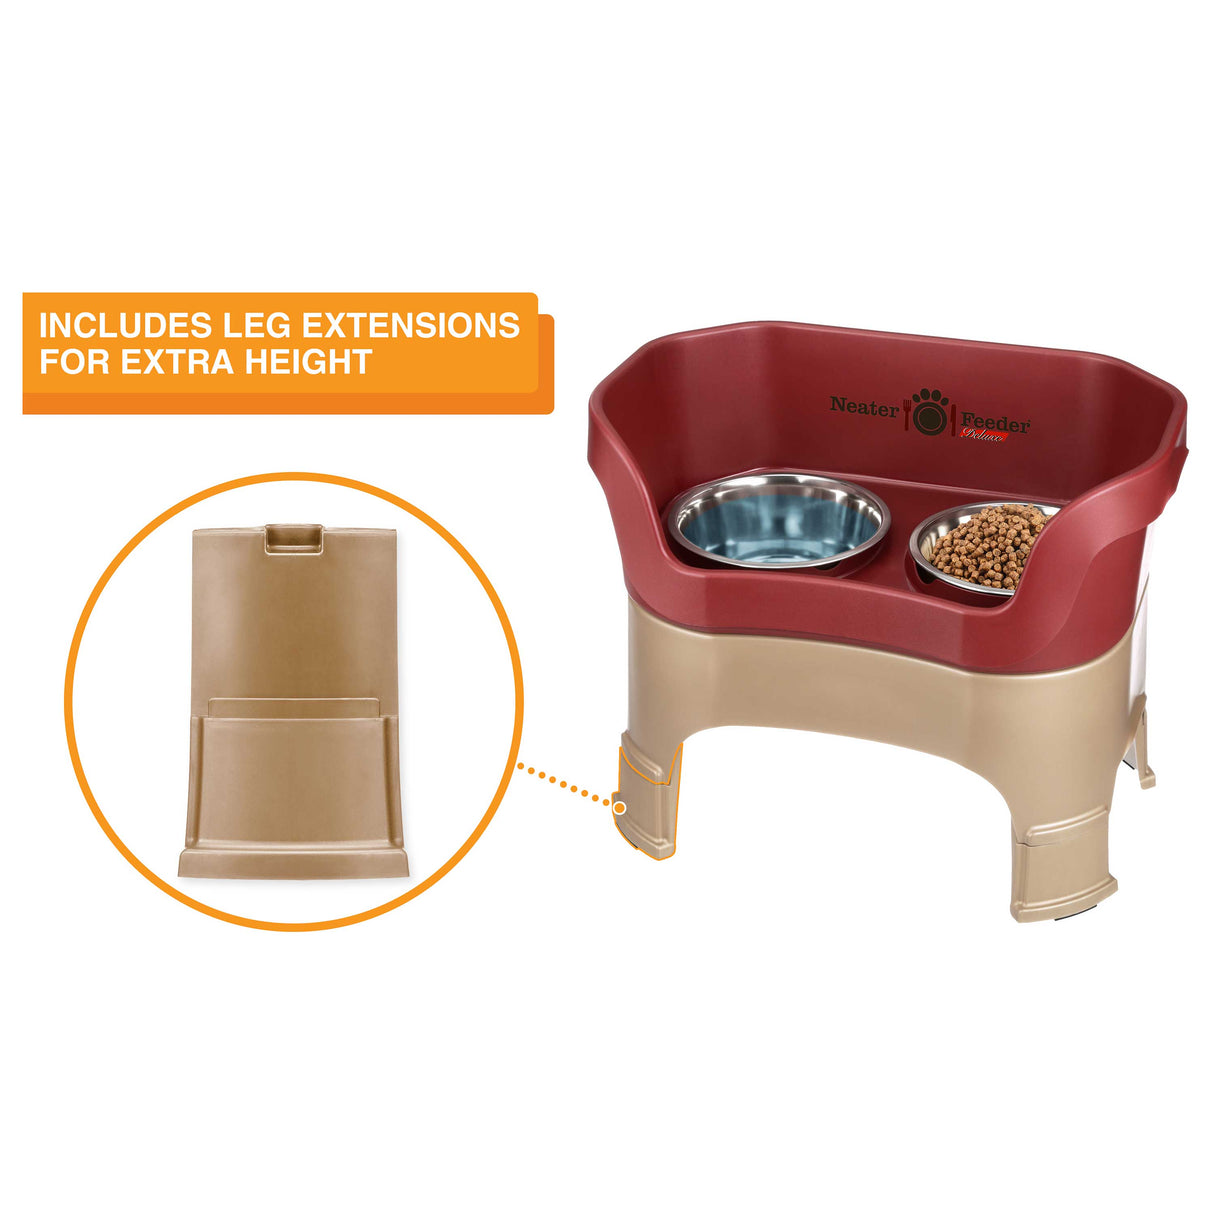 This Neater Feeder includes removeable leg extensions